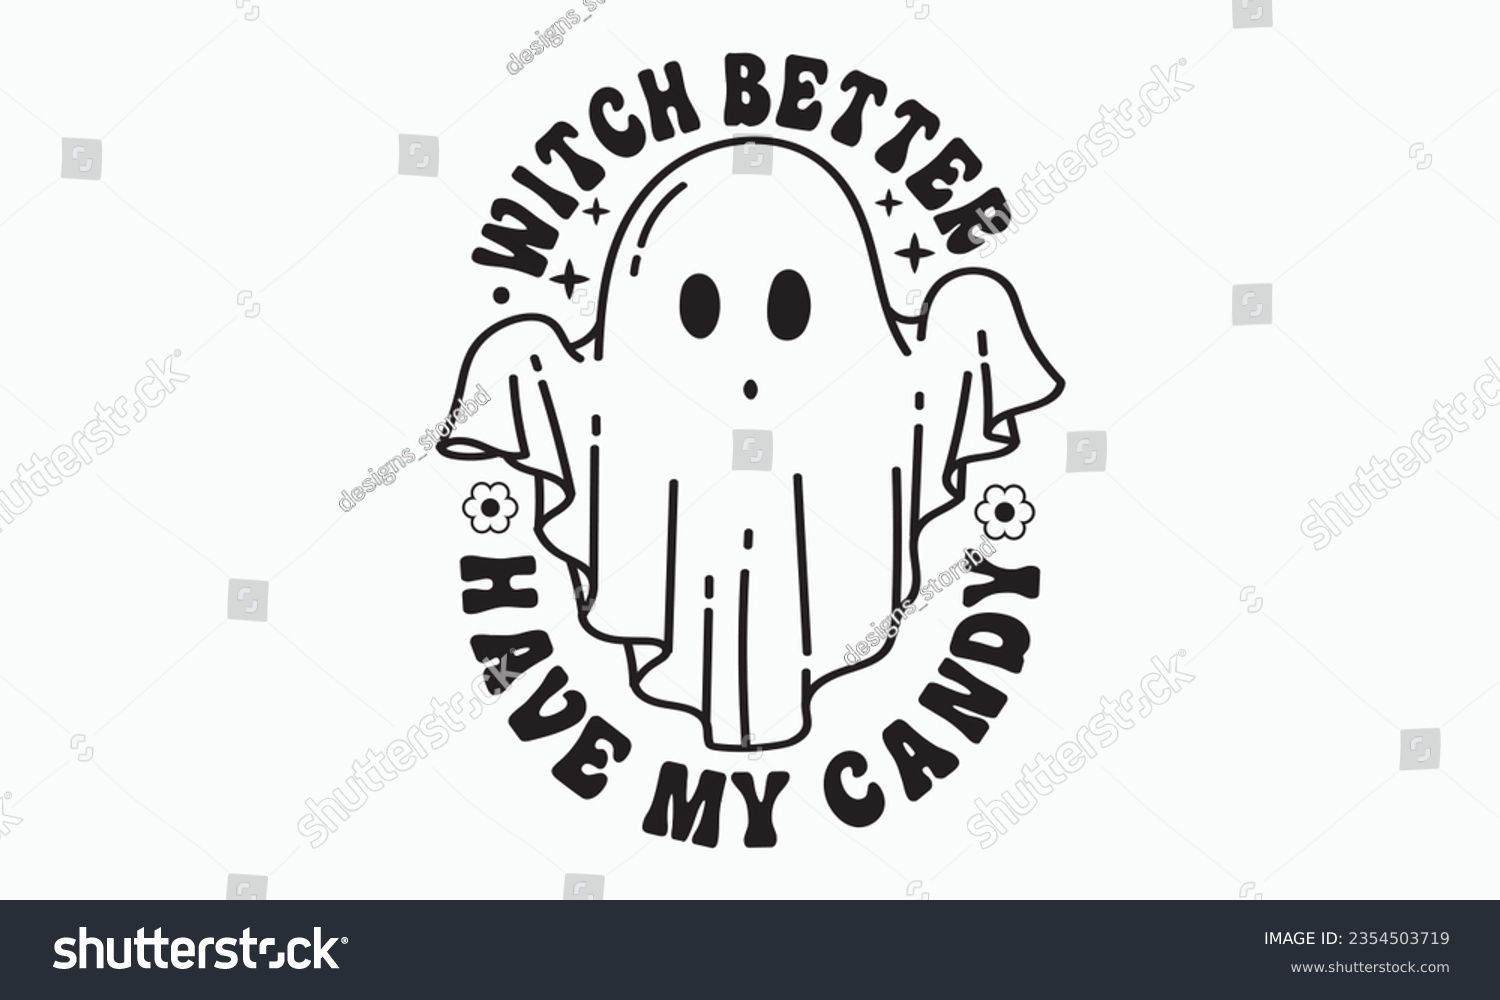 SVG of Witch better have my candy, halloween svg design bundle, Retro halloween svg, happy halloween vector, pumpkin, witch, spooky, ghost, funny halloween t-shirt quotes Bundle, Cut File Cricut, Silhouette  svg